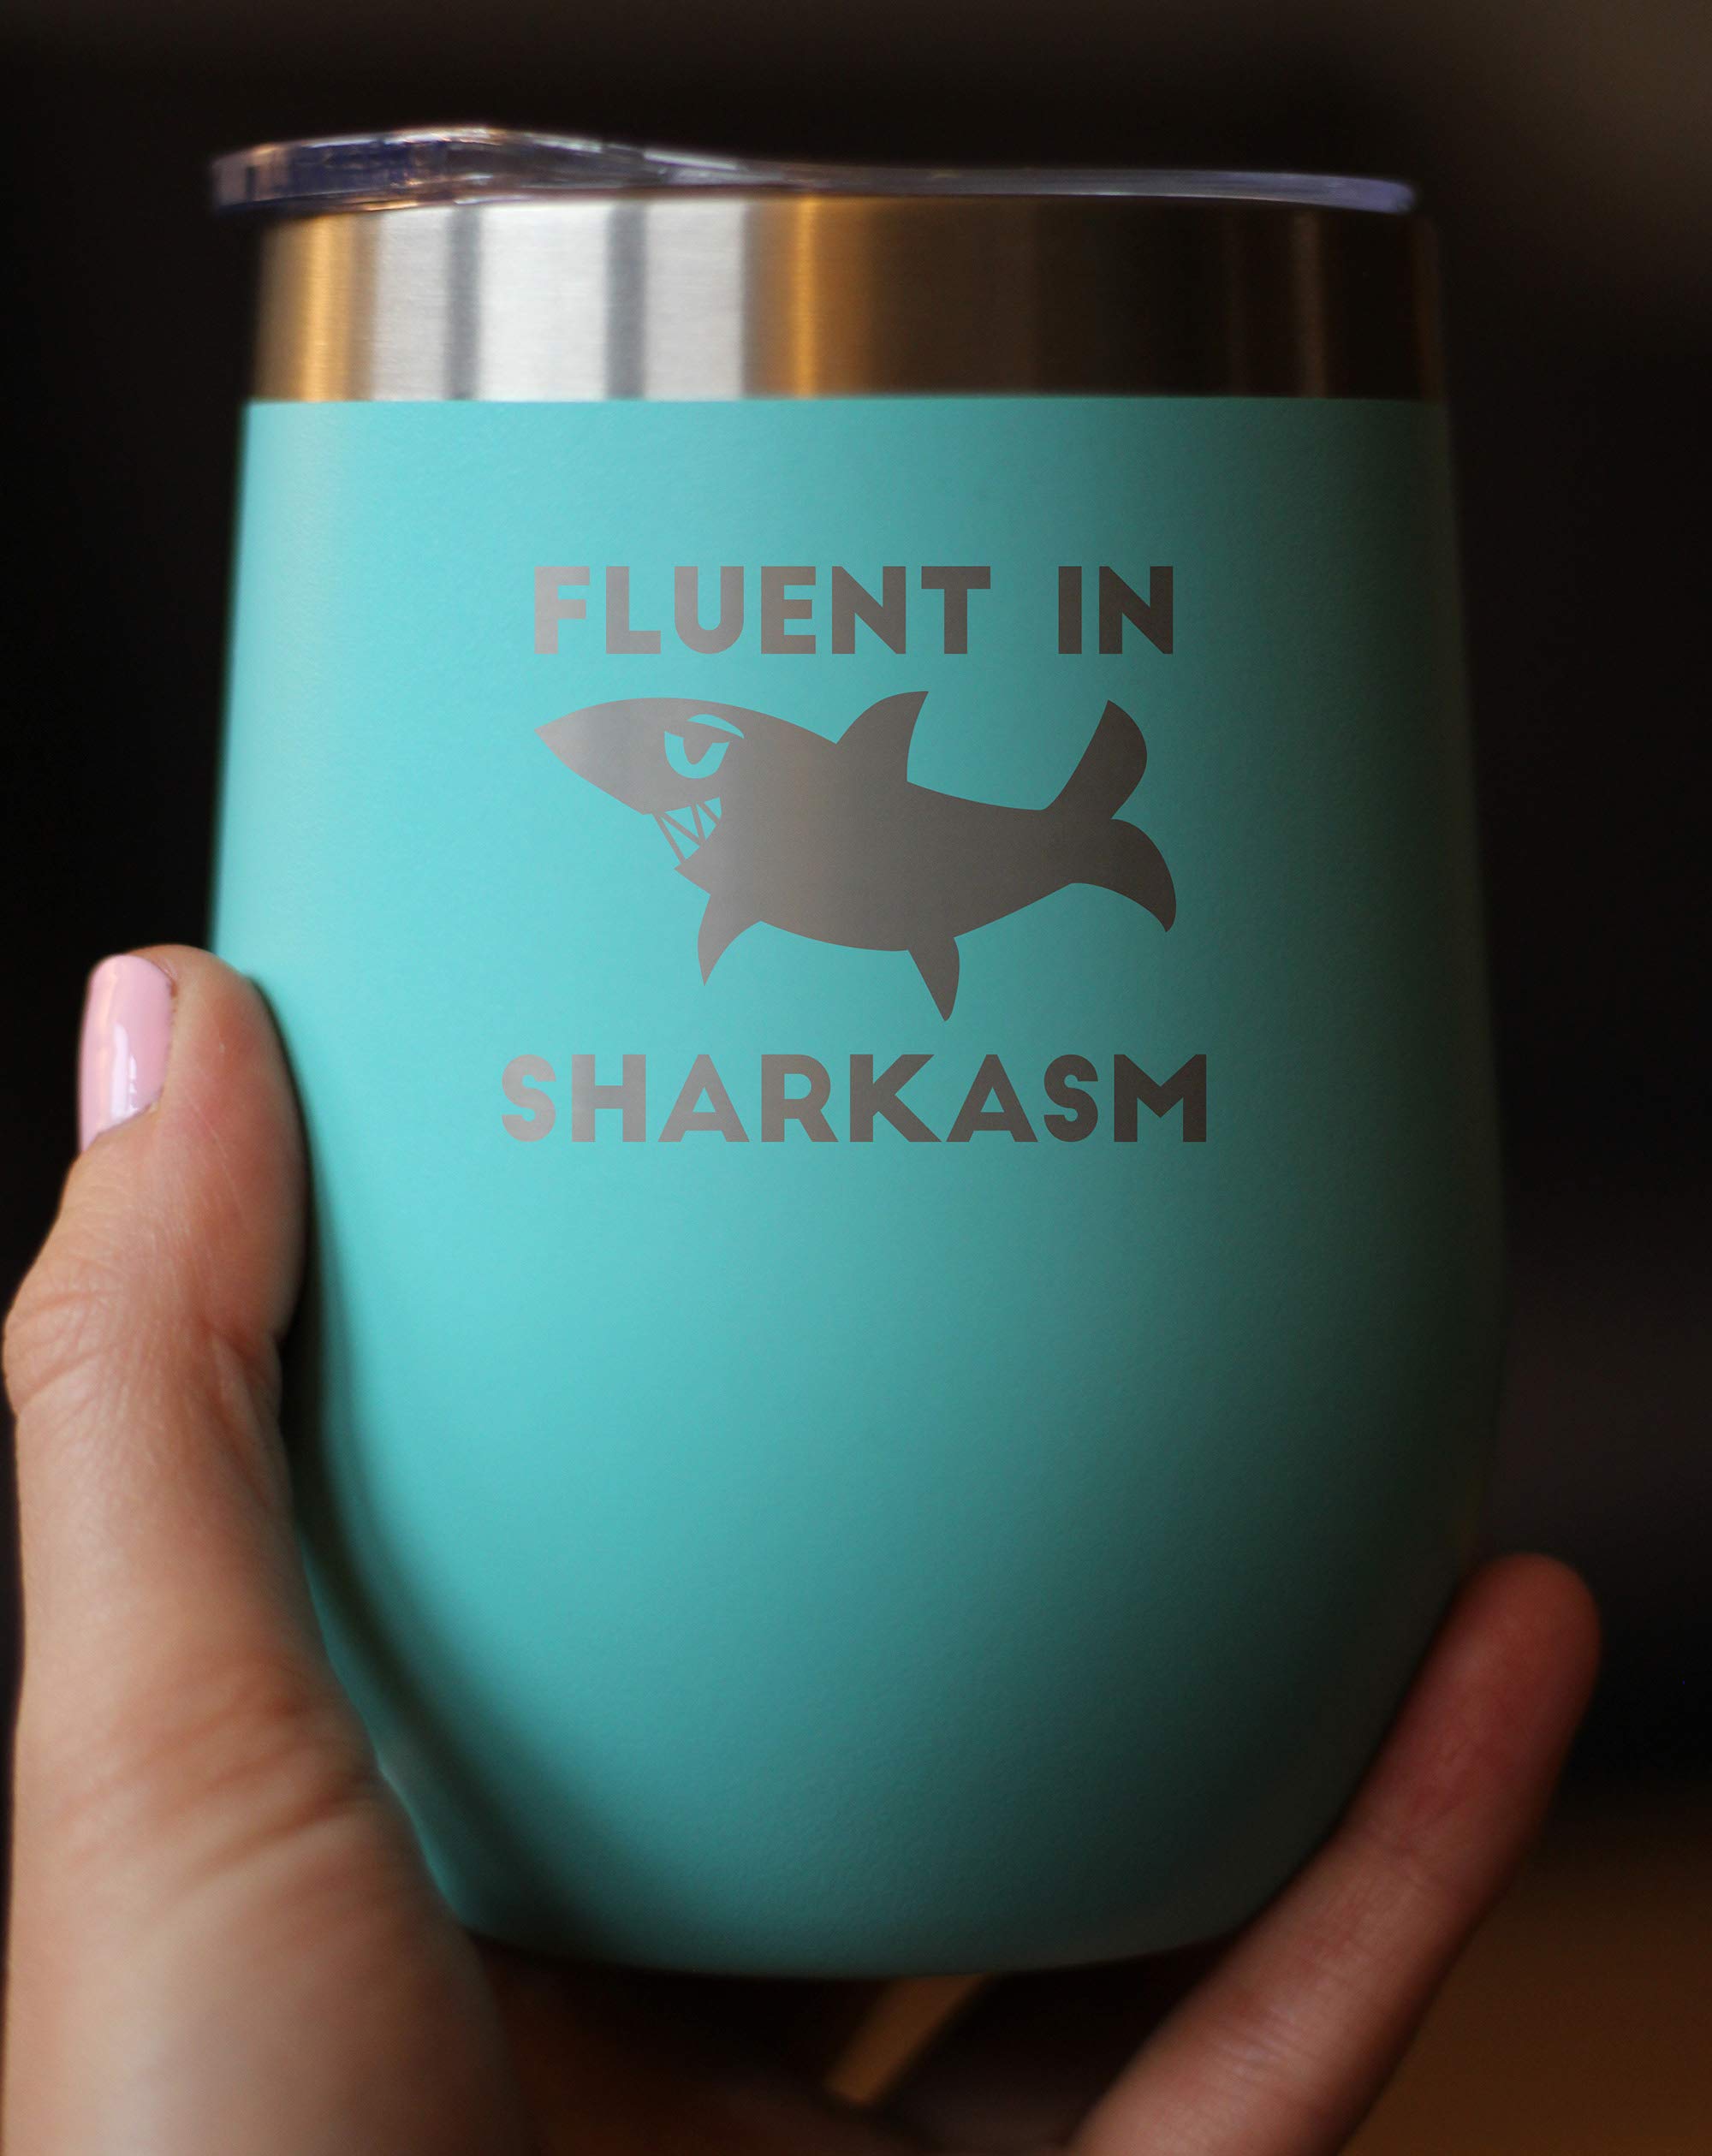 Bevvee Fluent in Sharkasm - Funny Shark Wine Tumbler Glass with Sliding Lid - Stainless Steel Insulated Mug - Cute Shark Decor Gifts - Teal